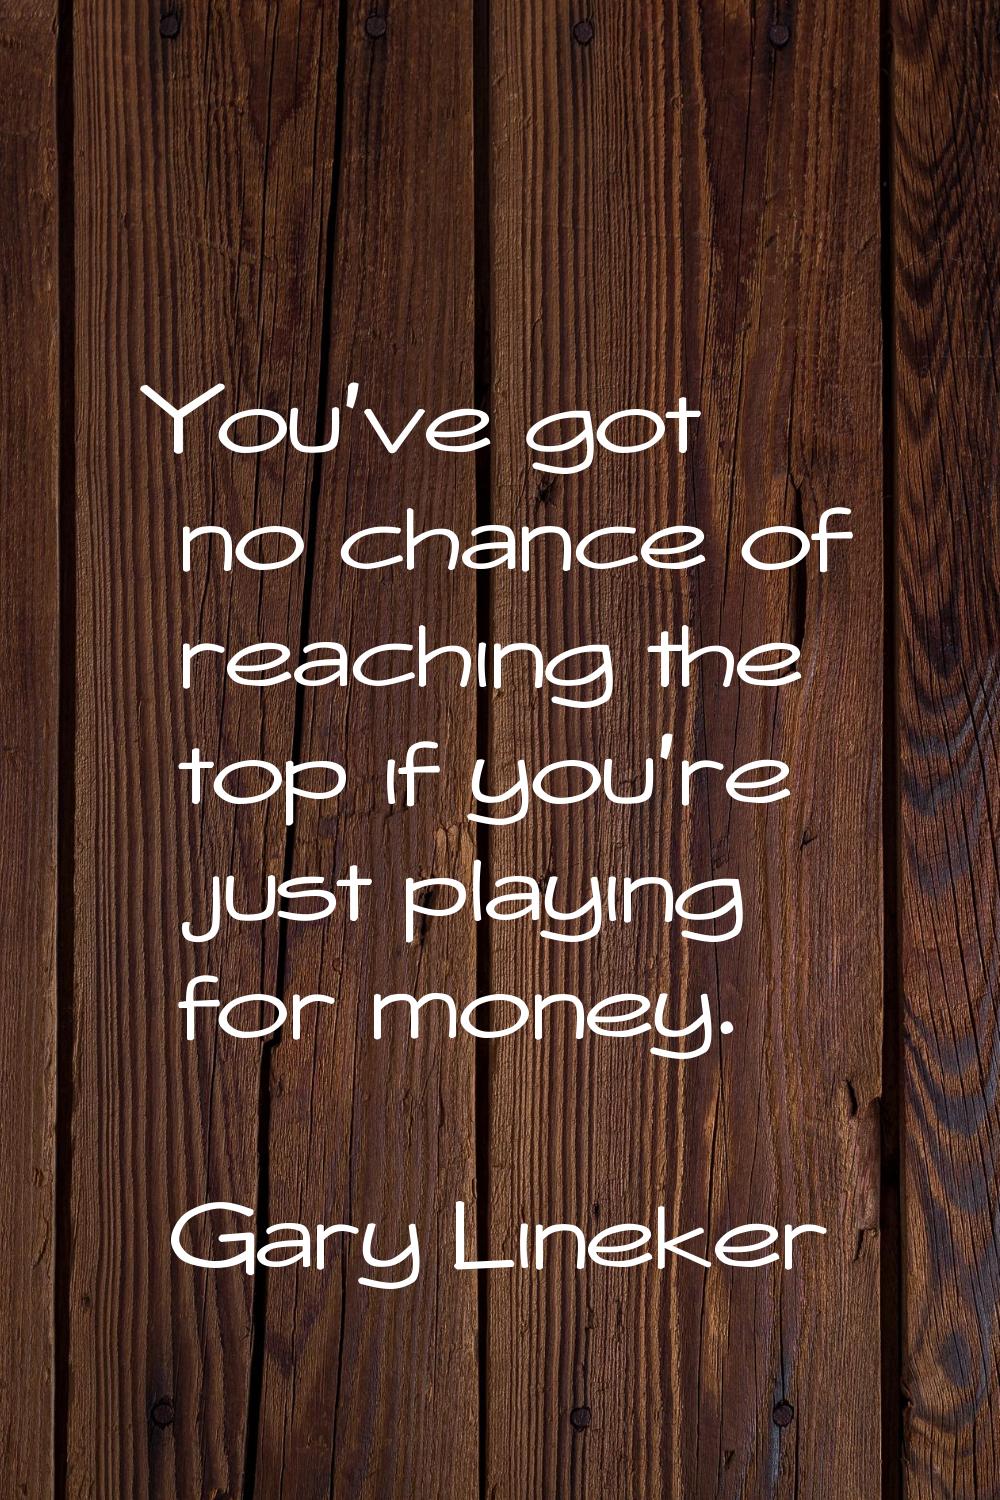 You've got no chance of reaching the top if you're just playing for money.